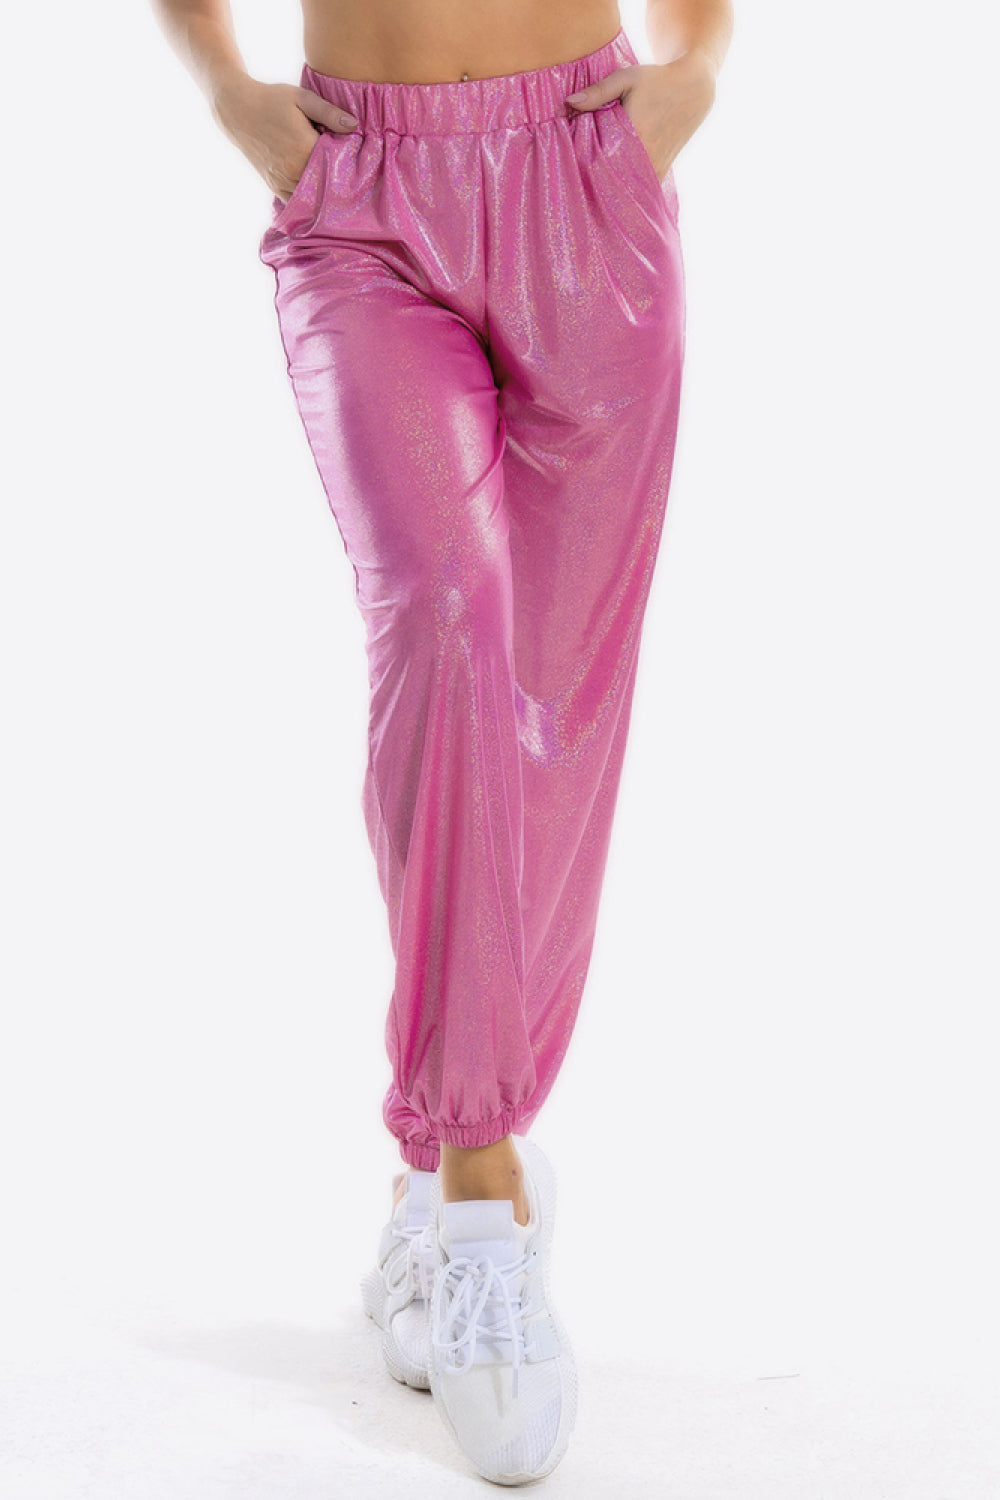 Glitter Elastic Waist Pants with Pockets - Pink / S - Bottoms - Pants - 1 - 2024